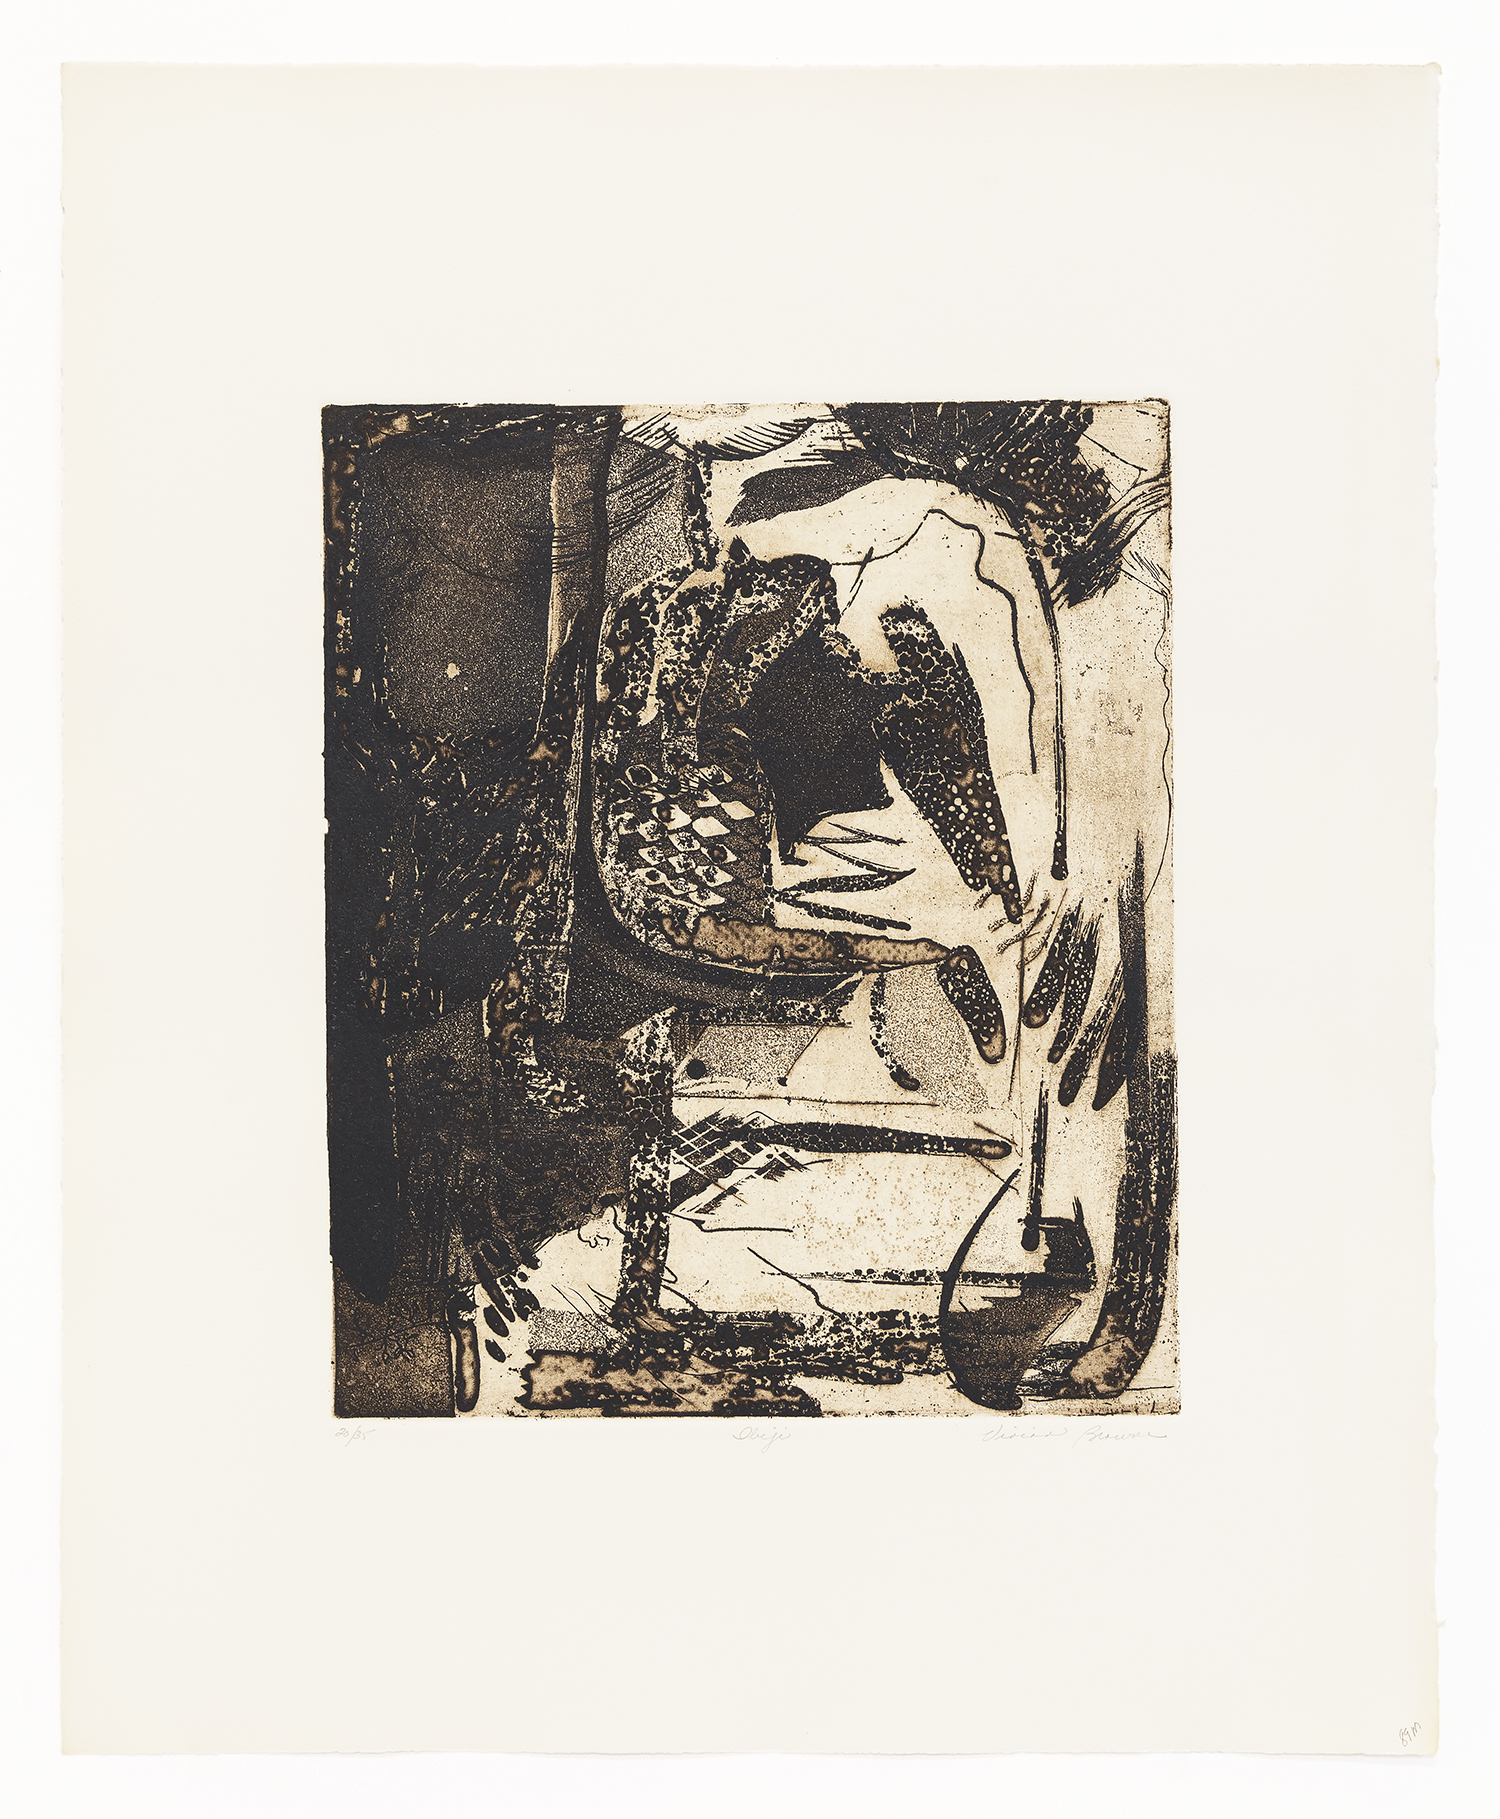 Obeji, 1973, Etching, 22 7/8 x 18 7/8 inches (58.1 x 47.9 cm), Edition of 35